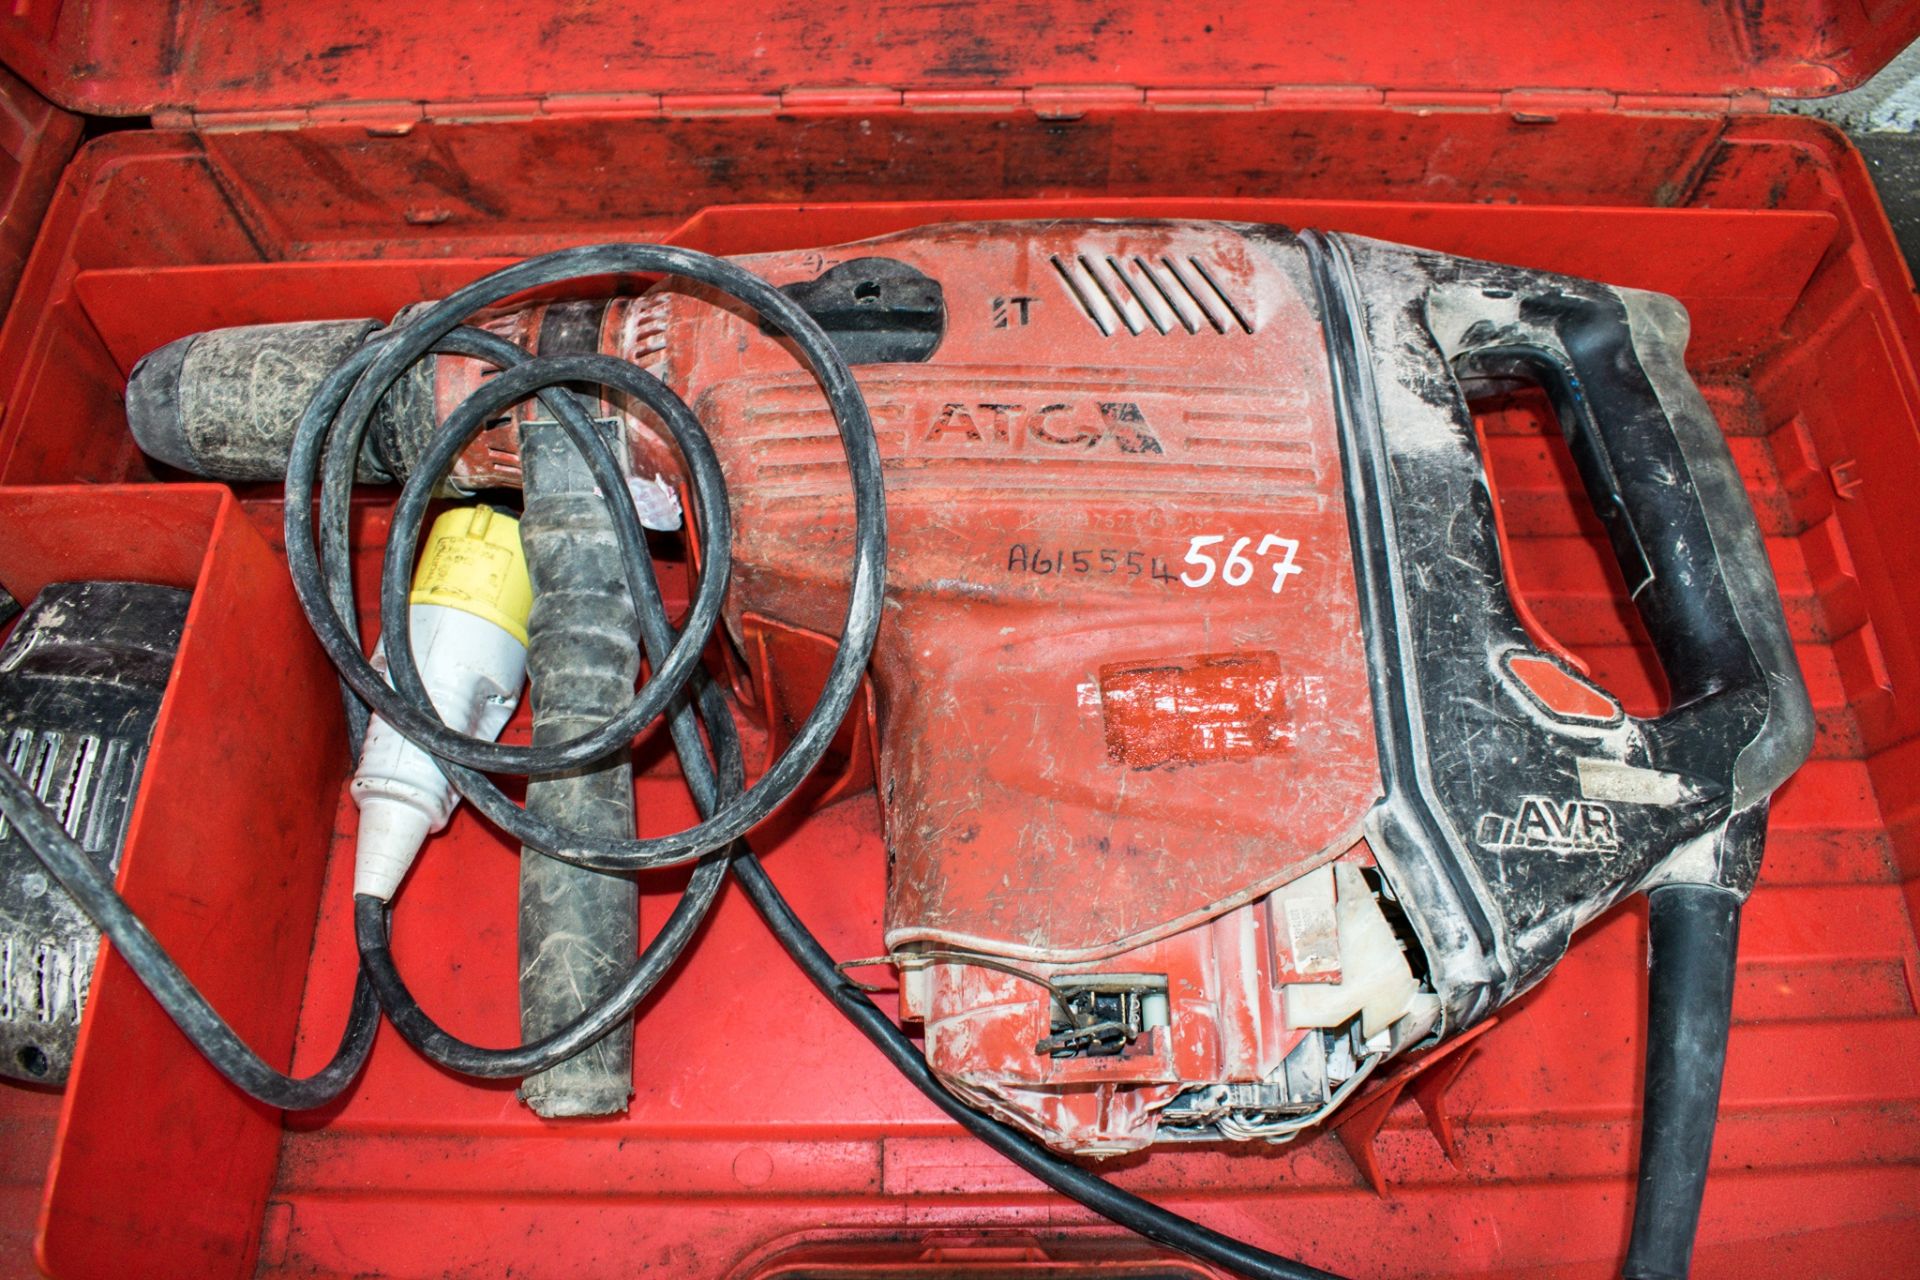 Hilti TE80-ATC 110v SDS rotary hammer drill c/w carry case A615554 ** Parts missing **